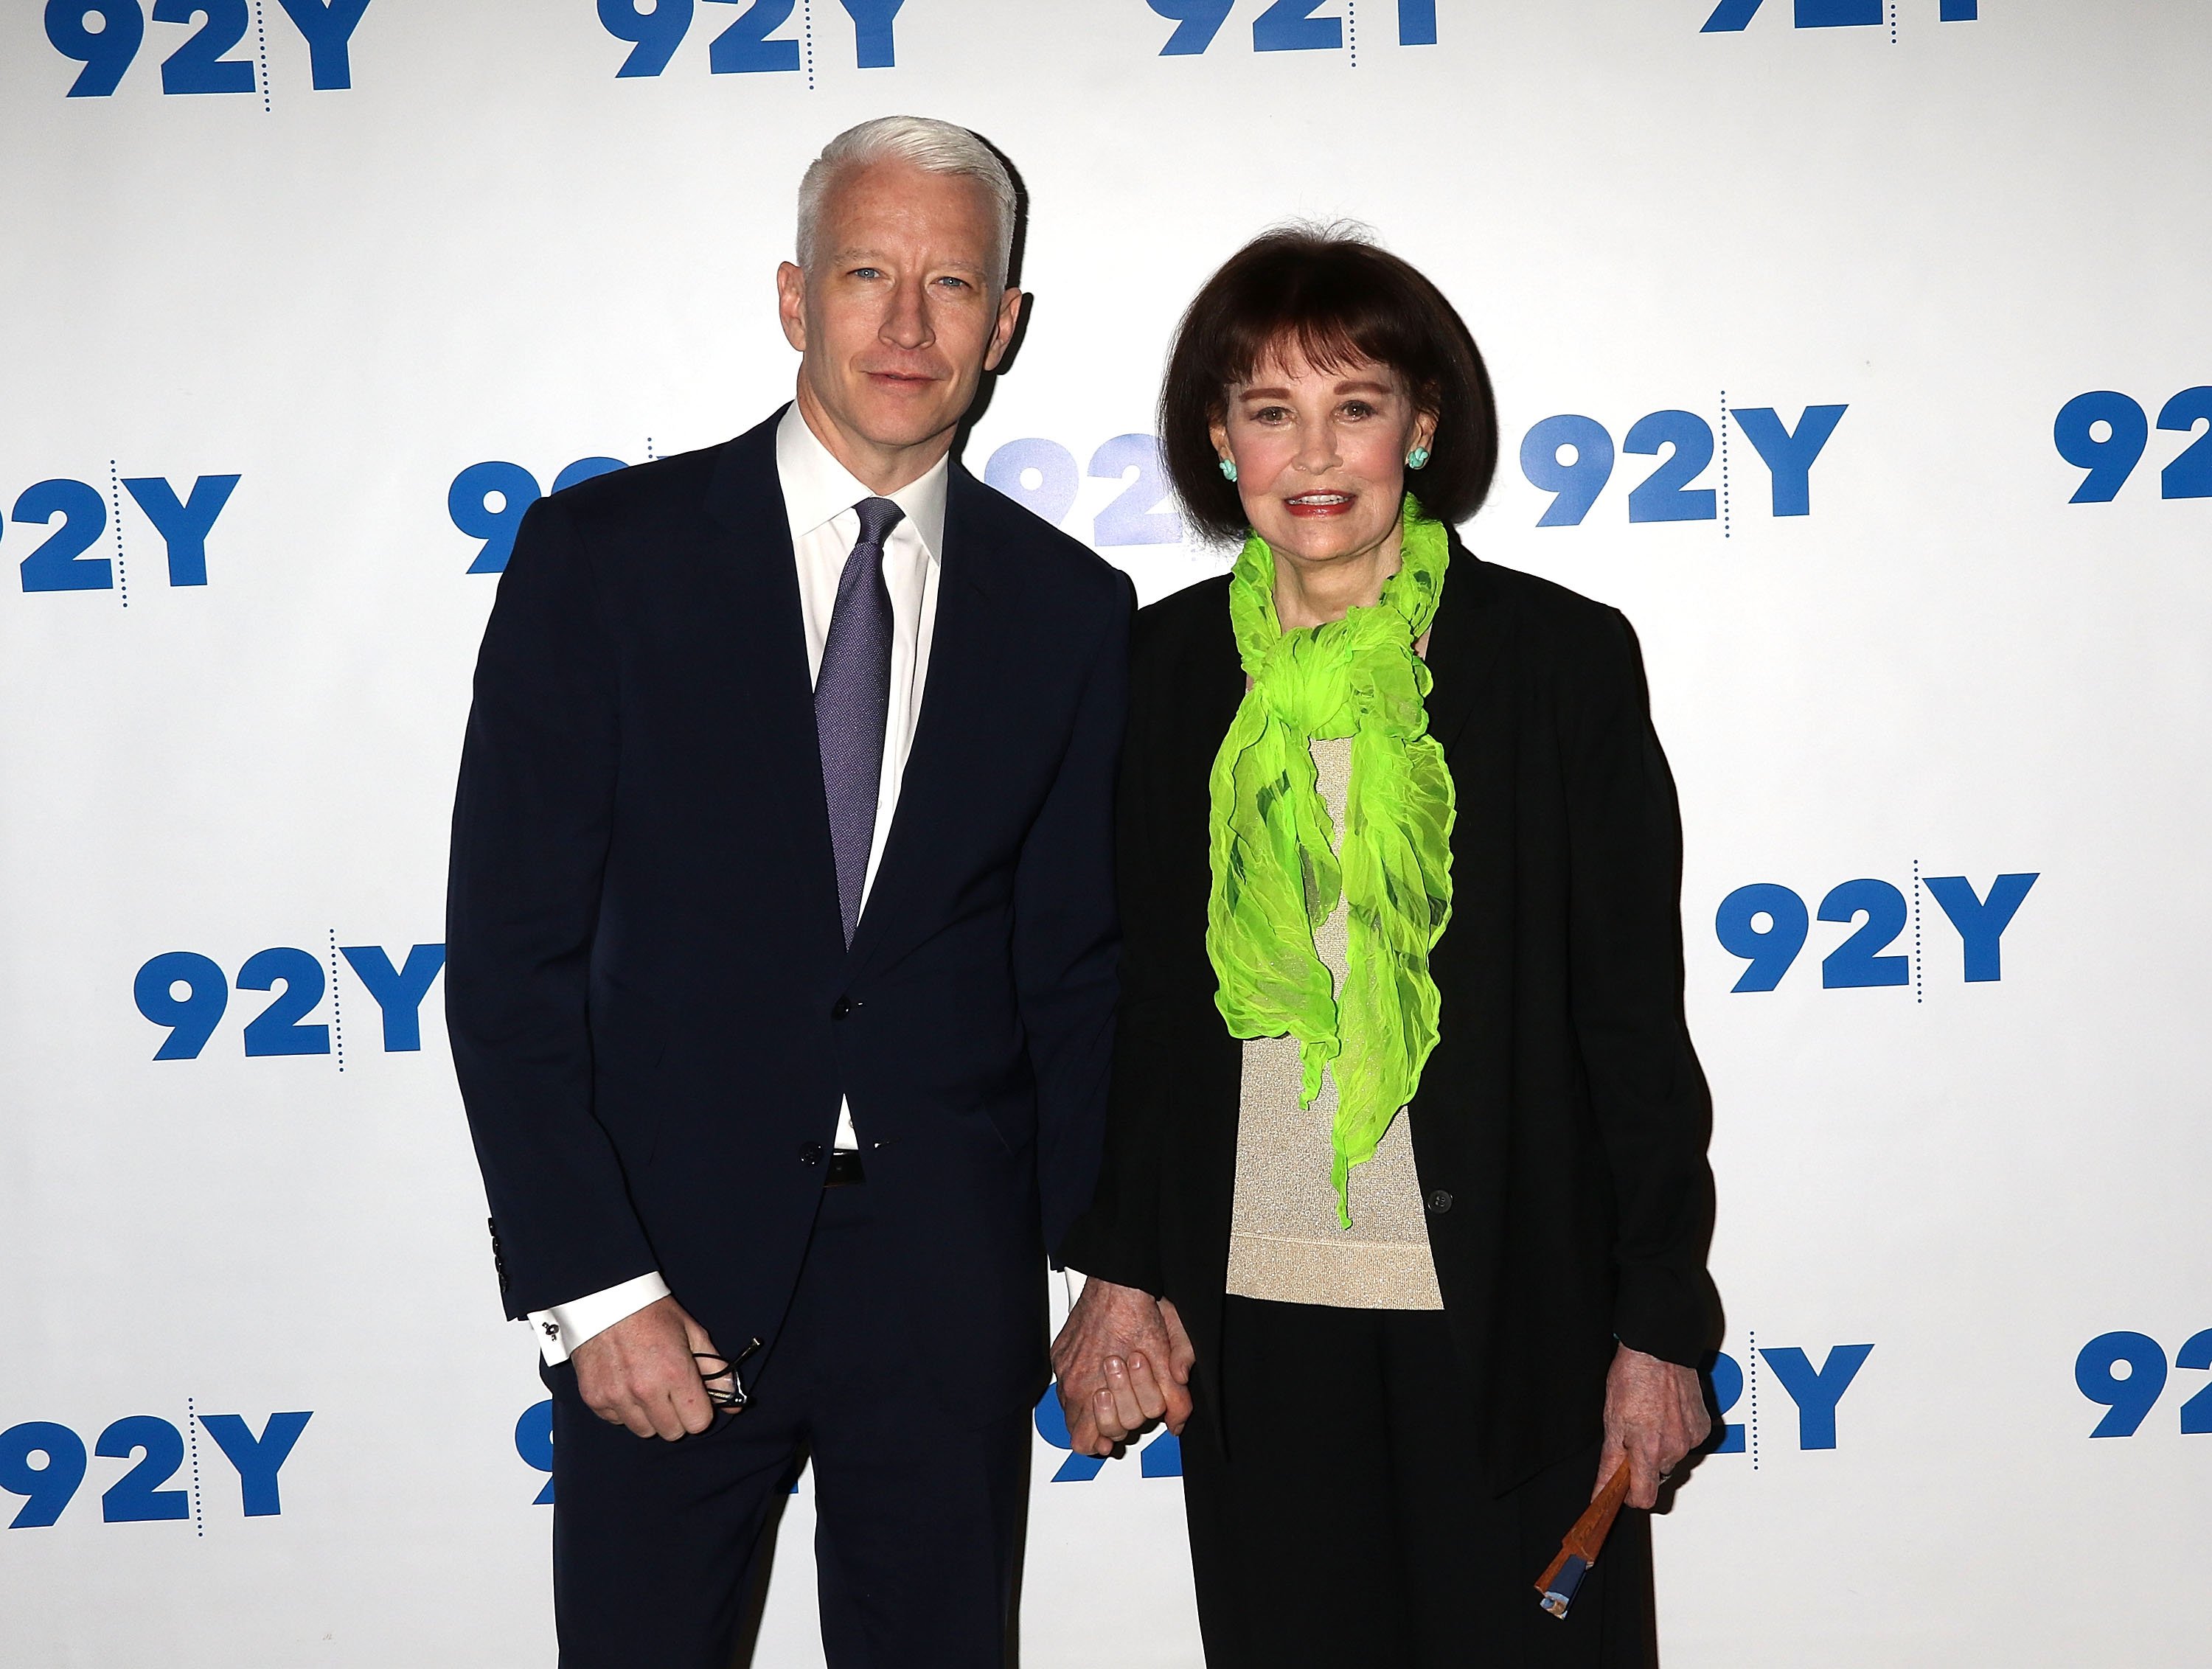 Anderson Cooper and Gloria Vanderbilt at 92nd Street Y on April 14, 2016, in New York City. | Source: Getty Images.